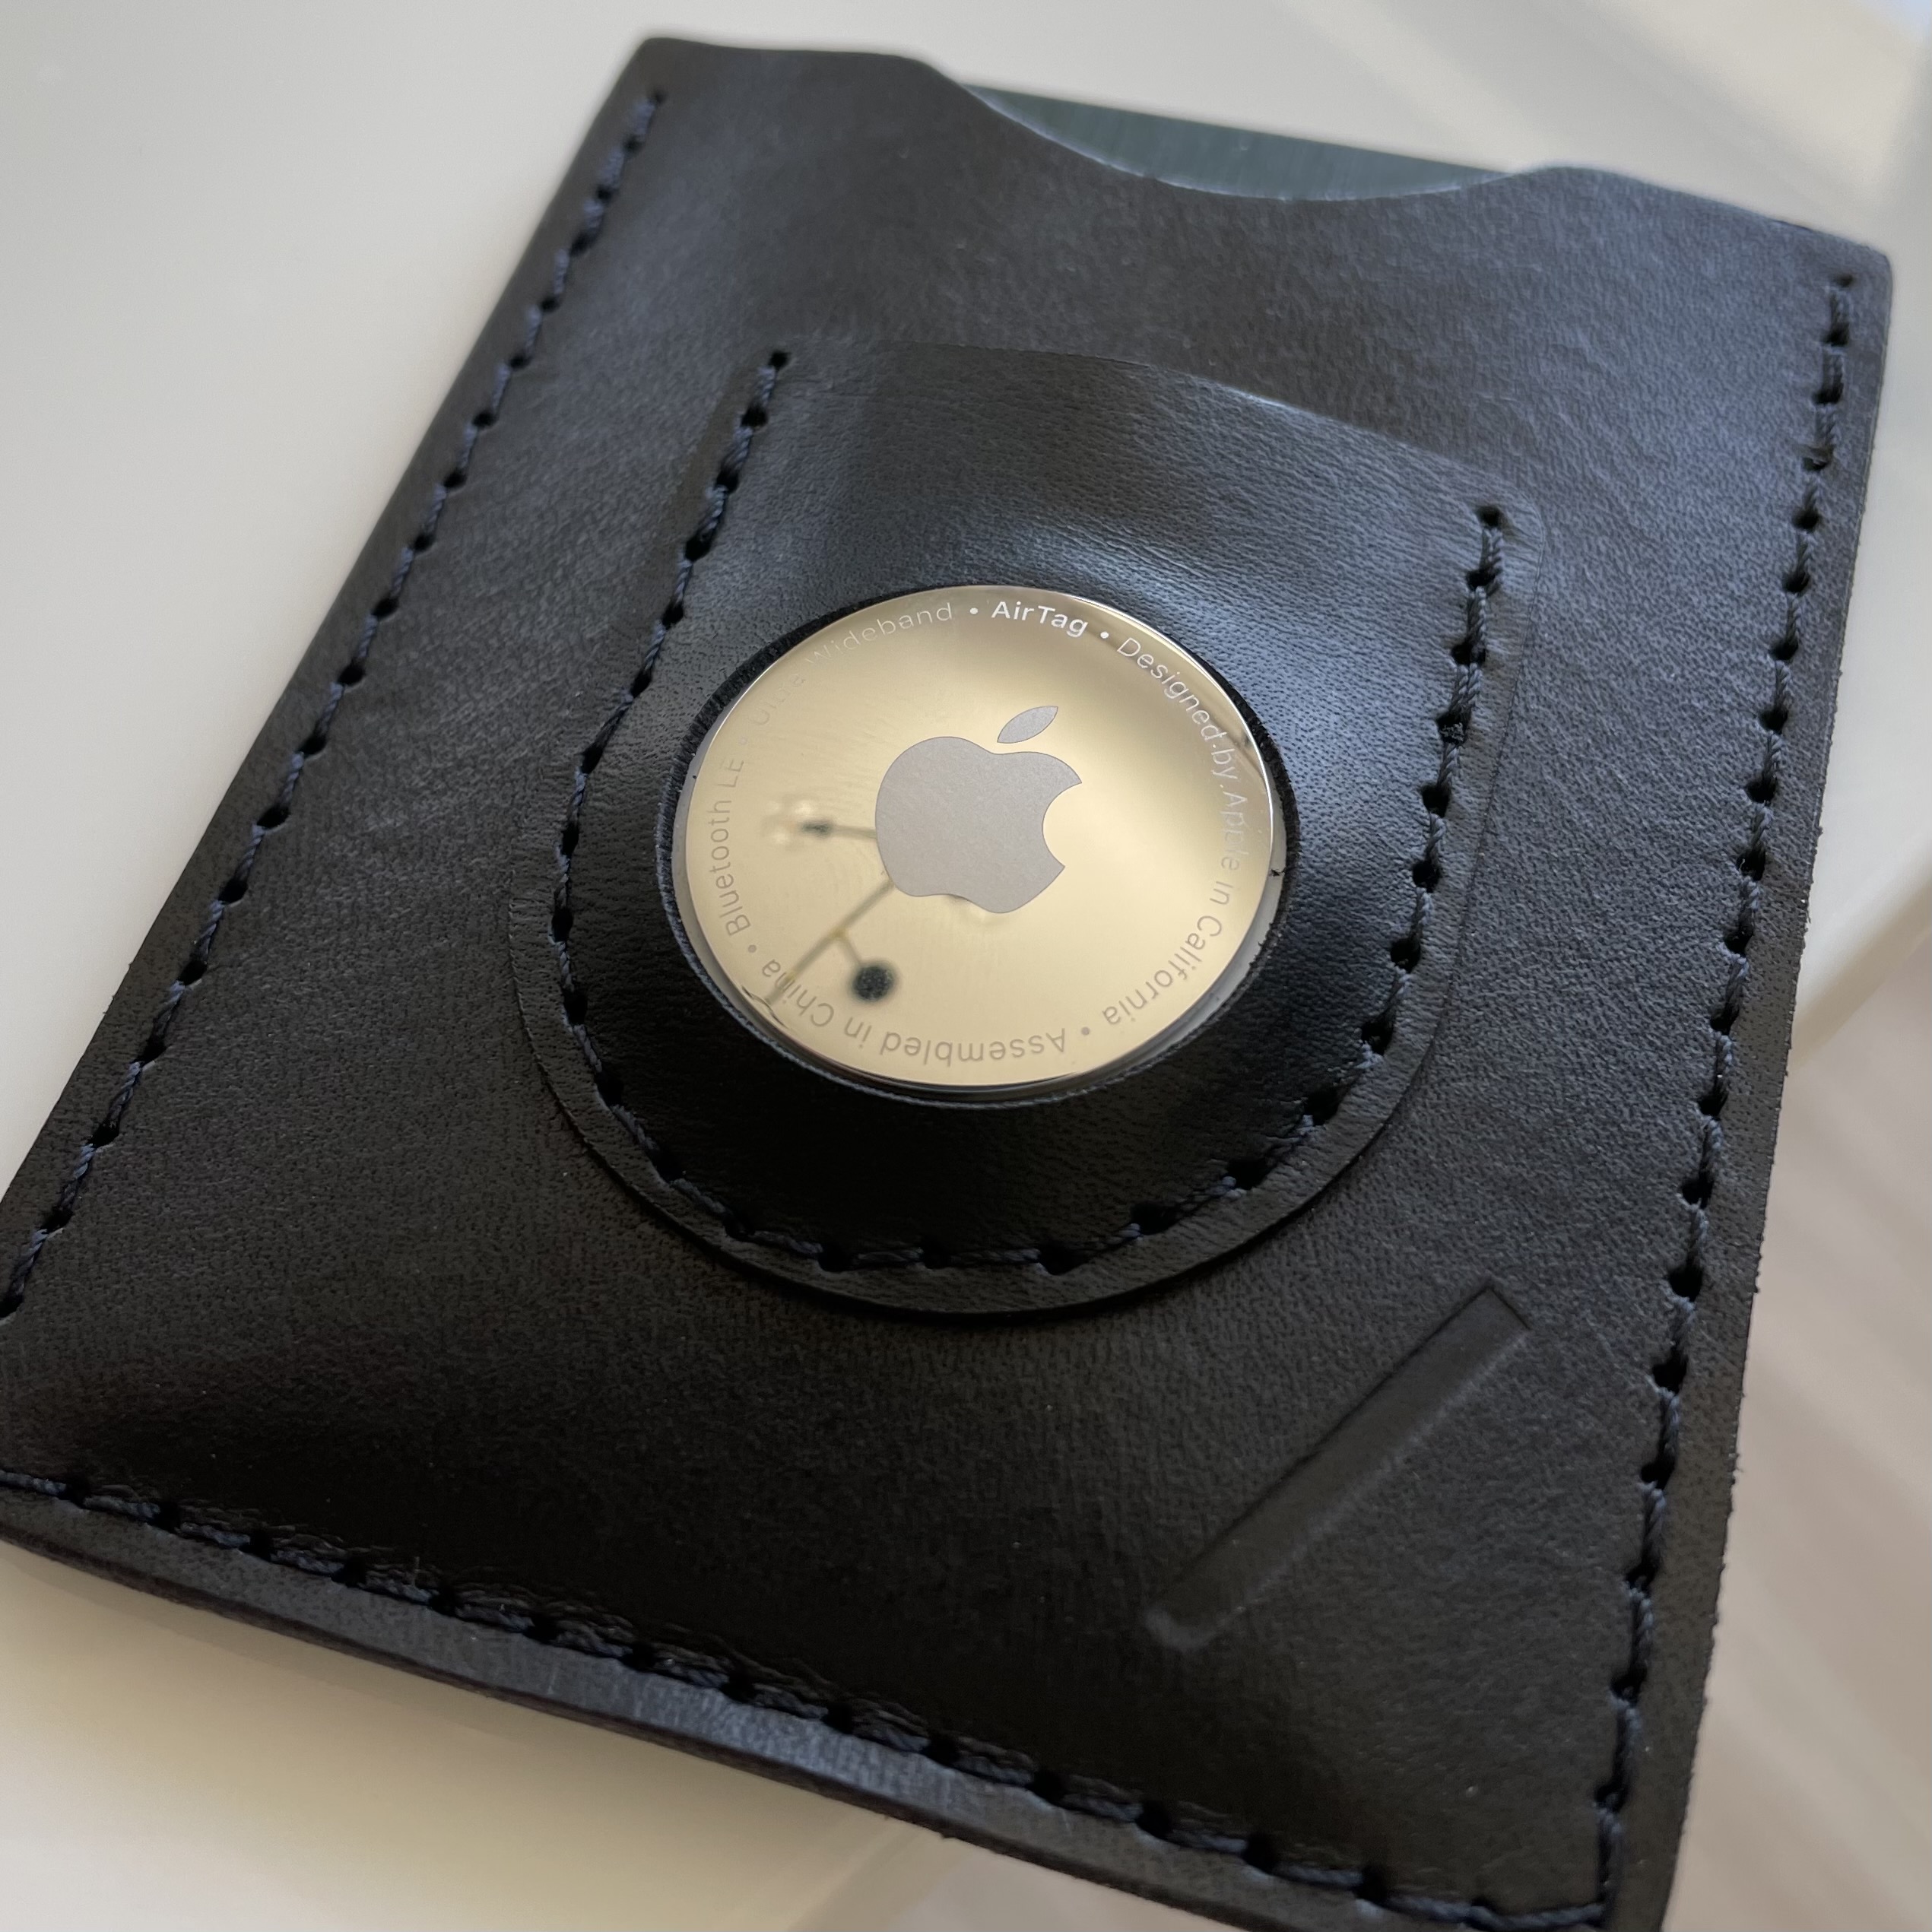 Wallet for AirTags – Snapback Slim Air Review - 9to5Mac